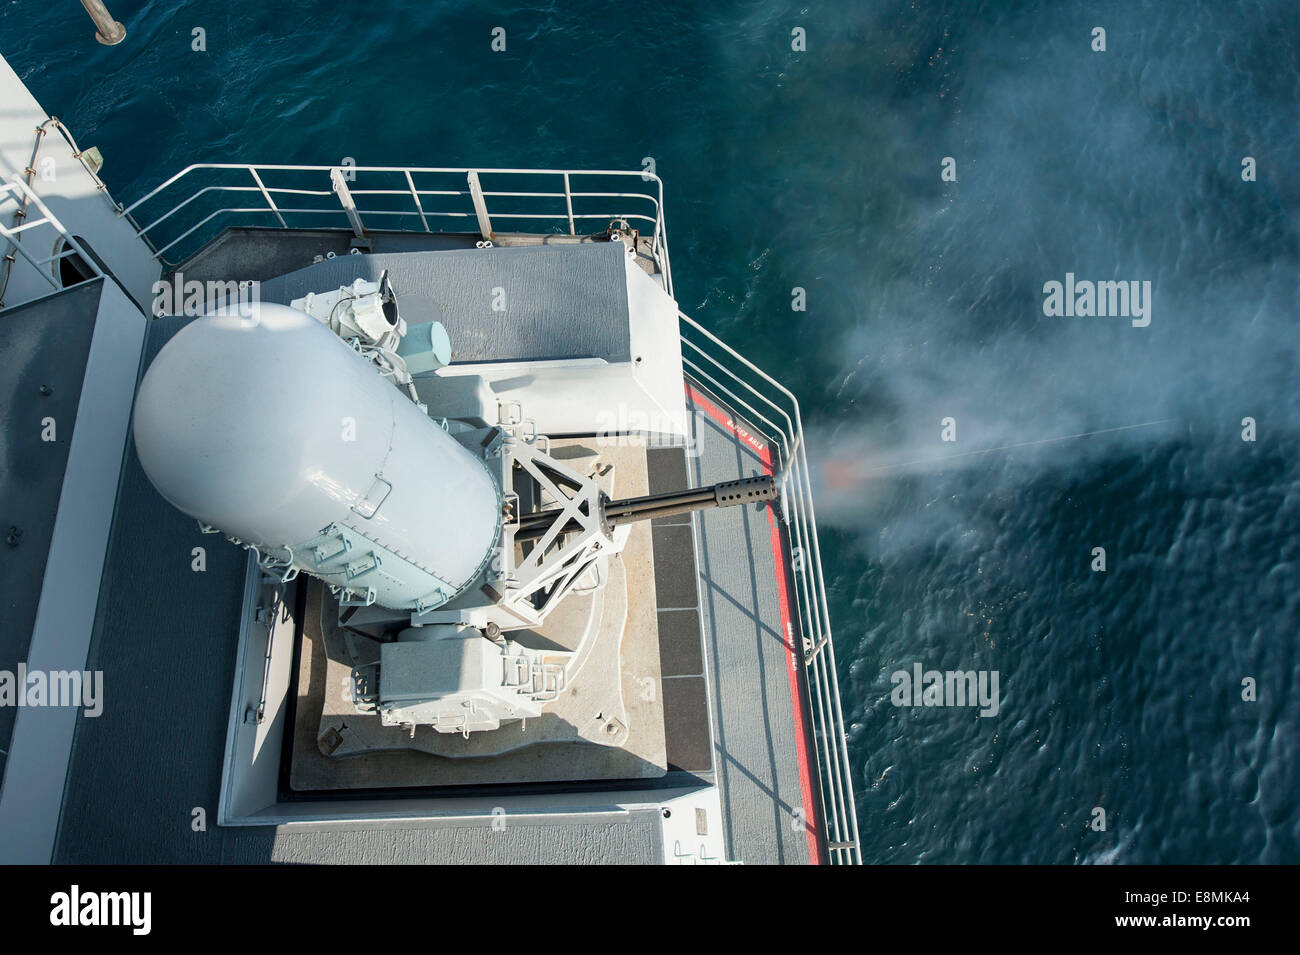 Gulf of Oman, February 2, 2014 - A close-in weapons system fires during a calibration test on board the aircraft carrier USS Har Stock Photo